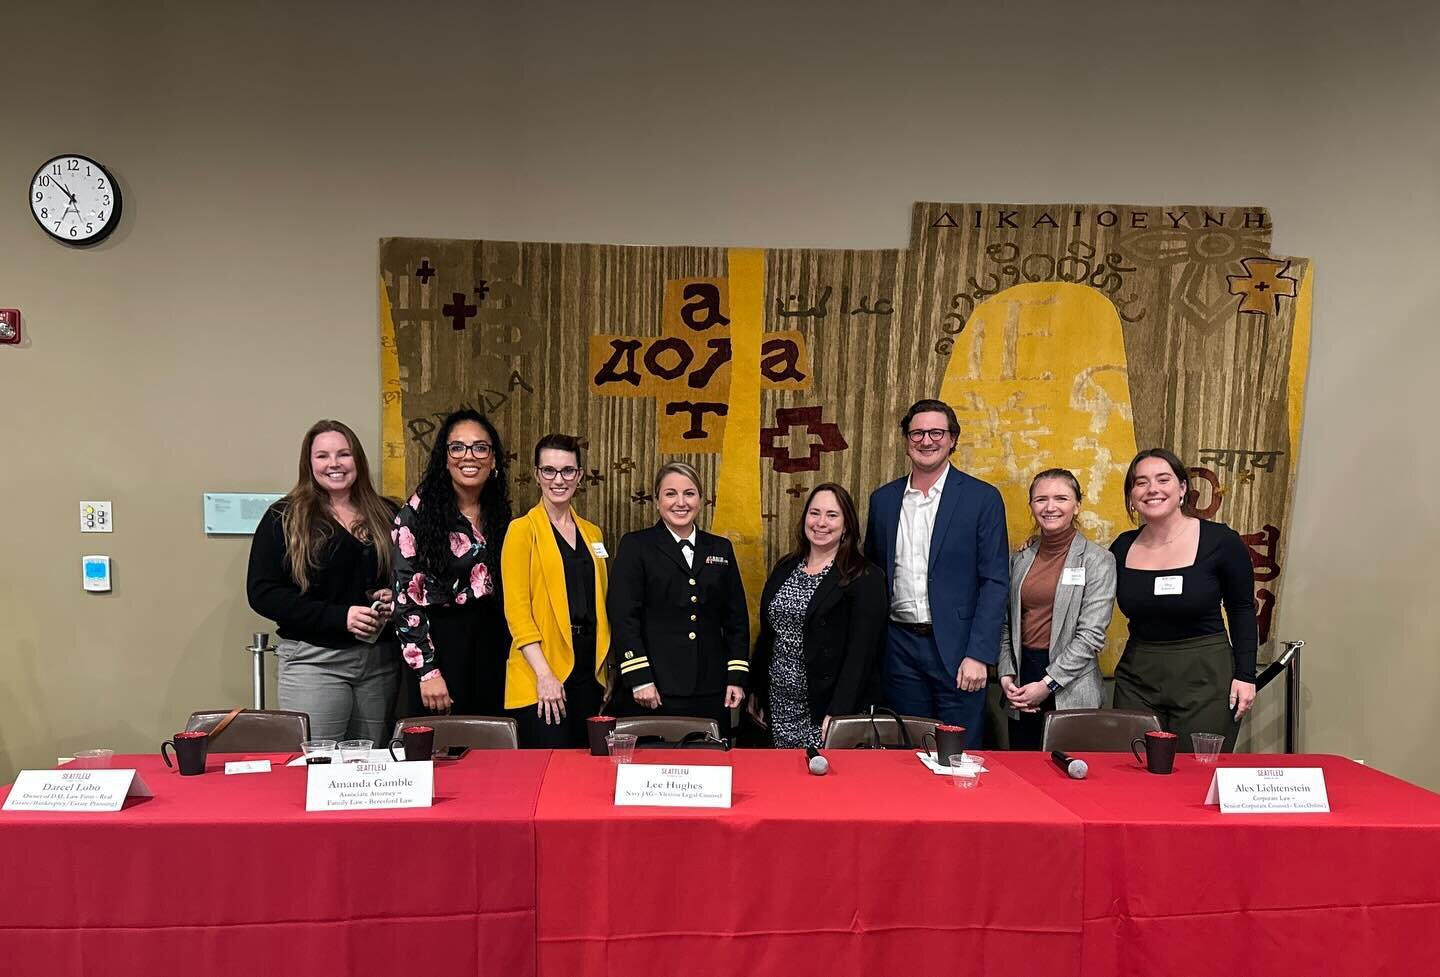 Spent yesterday evening with the Women&rsquo;s Law Caucus at Seattle University on a panel discussing all things about our careers as lawyers and how we got to where we are.
⠀
Such amazing panelists and a wonderful event!